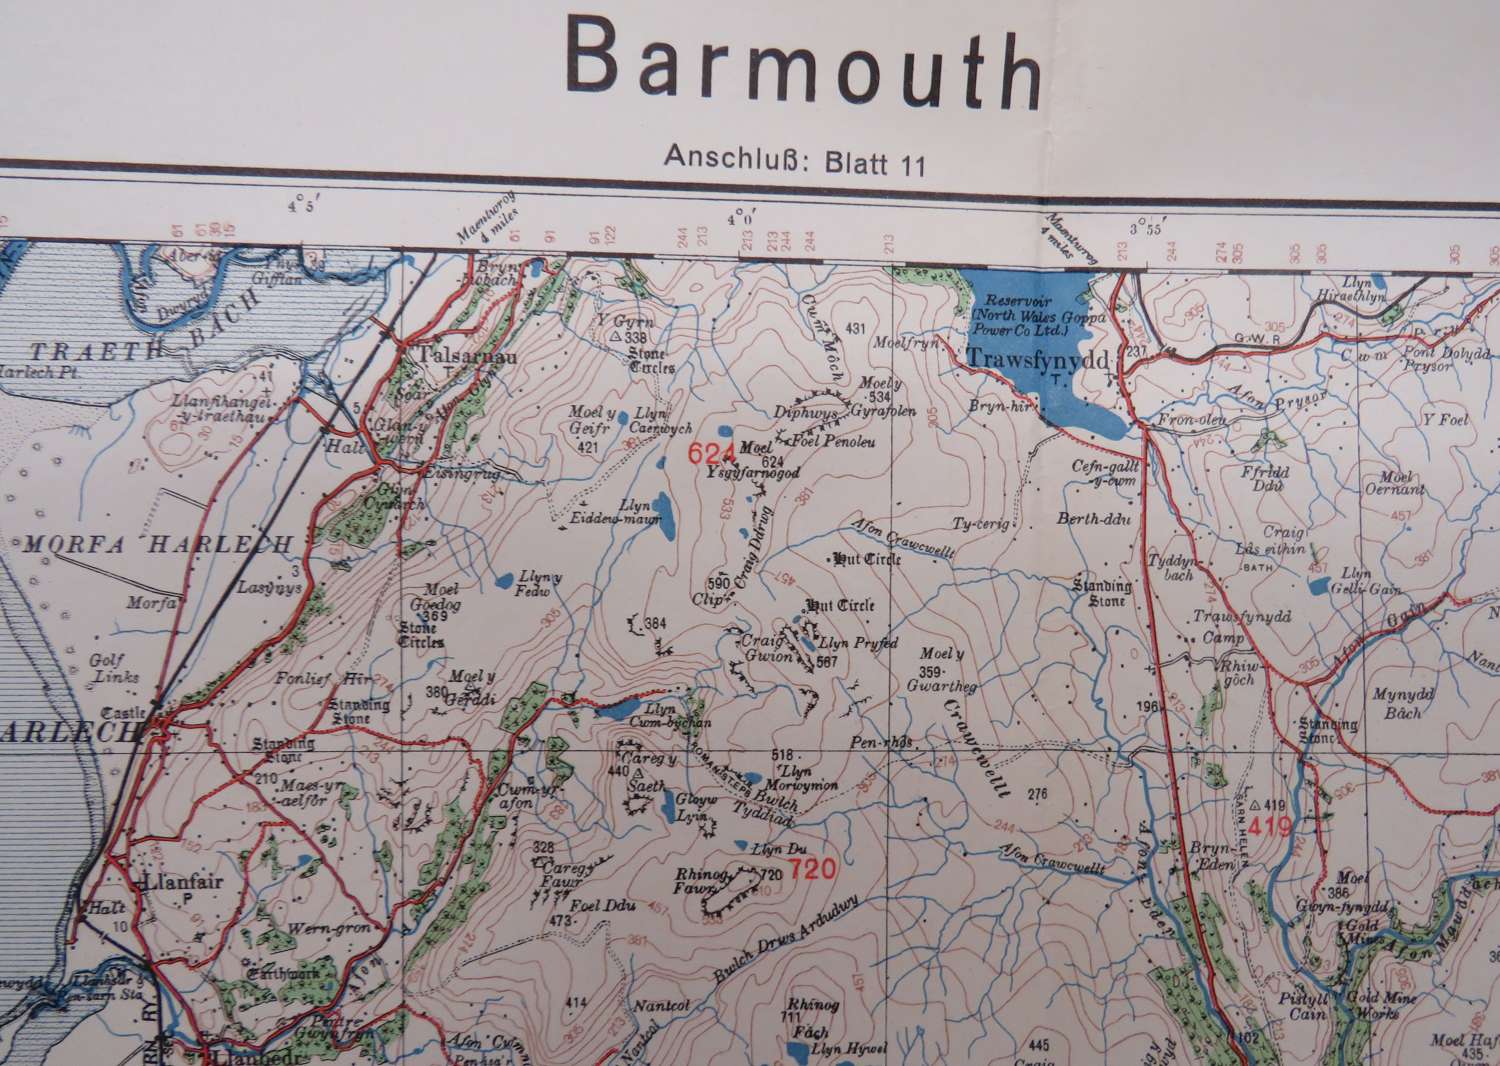 WW 2 German Invasion Map of Barmouth